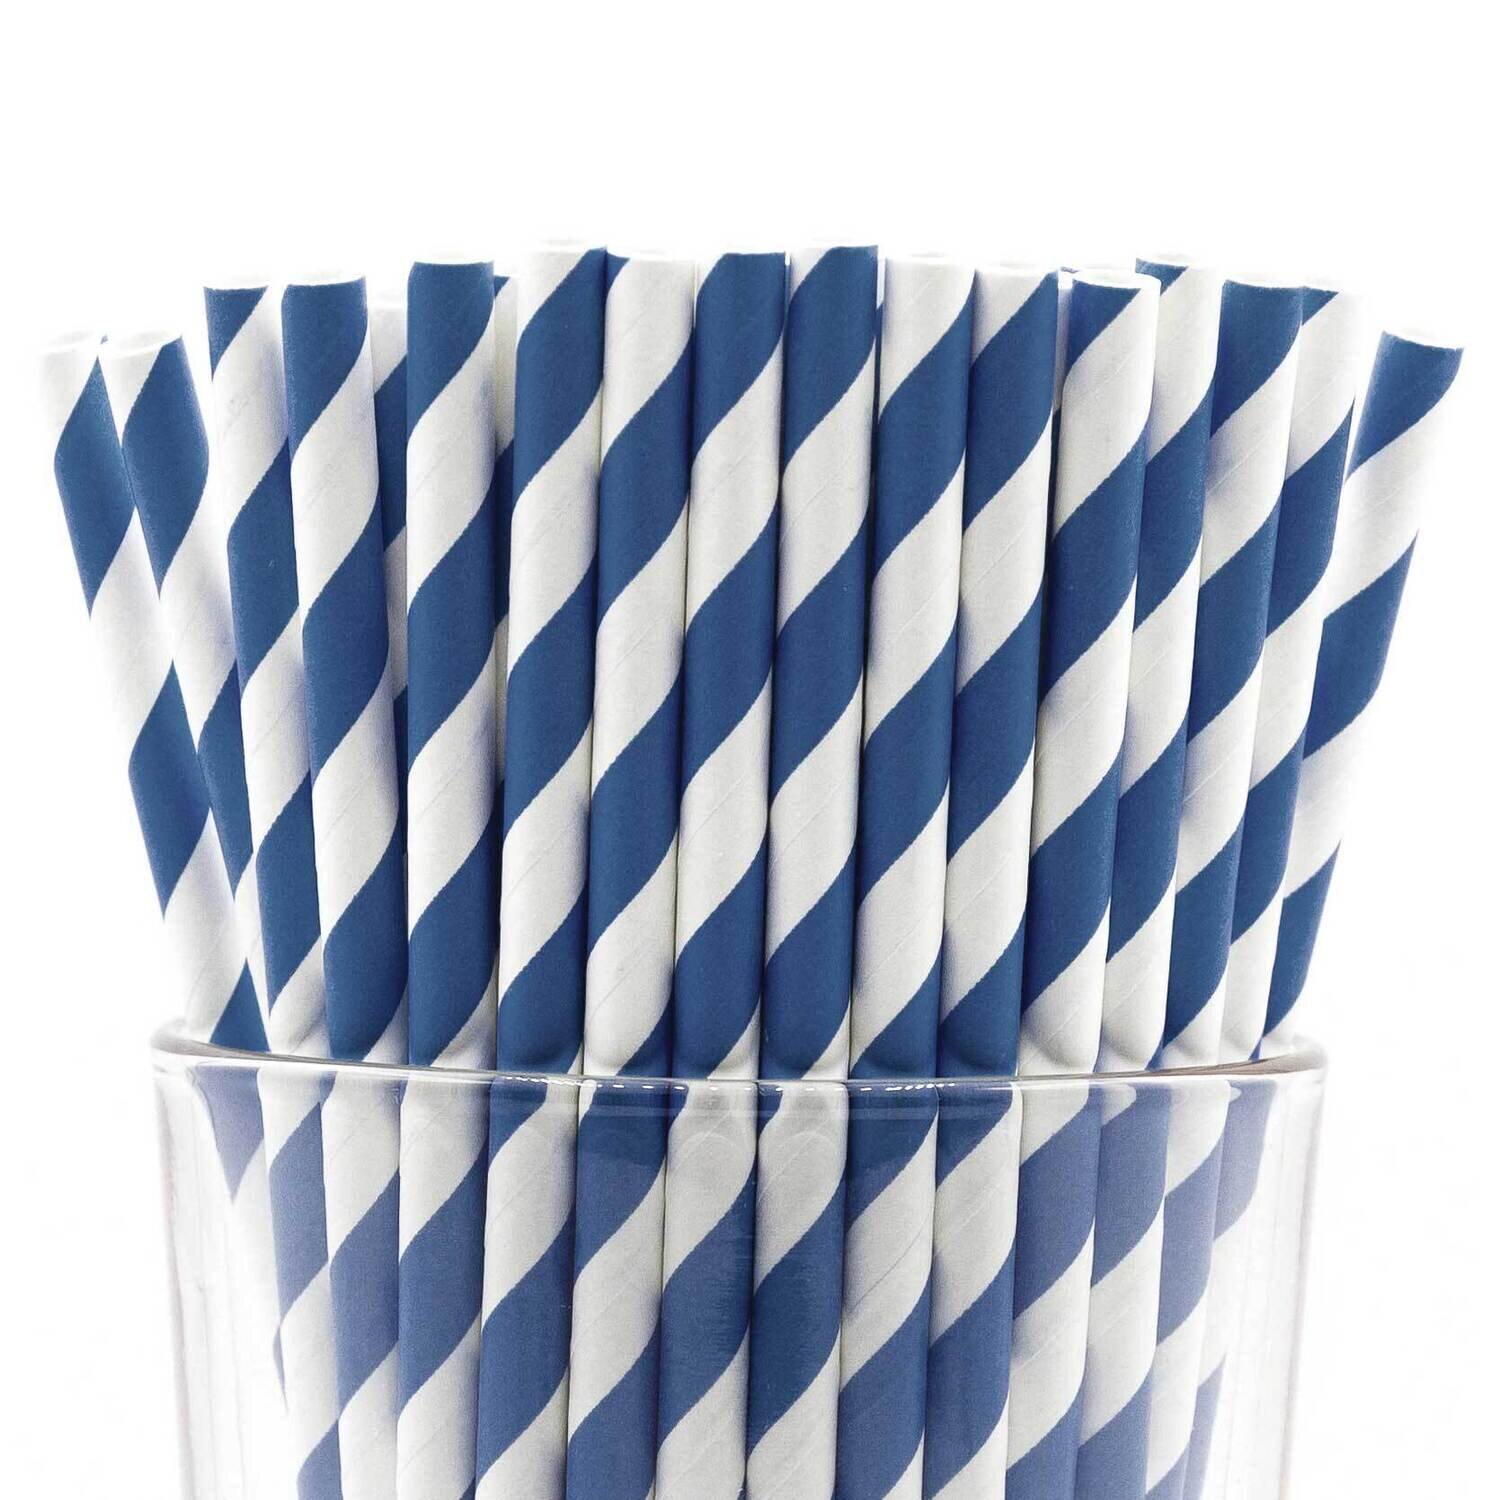 Pack of 150 Navy Wide Stripe Bio-degradable Paper Straws GM22629